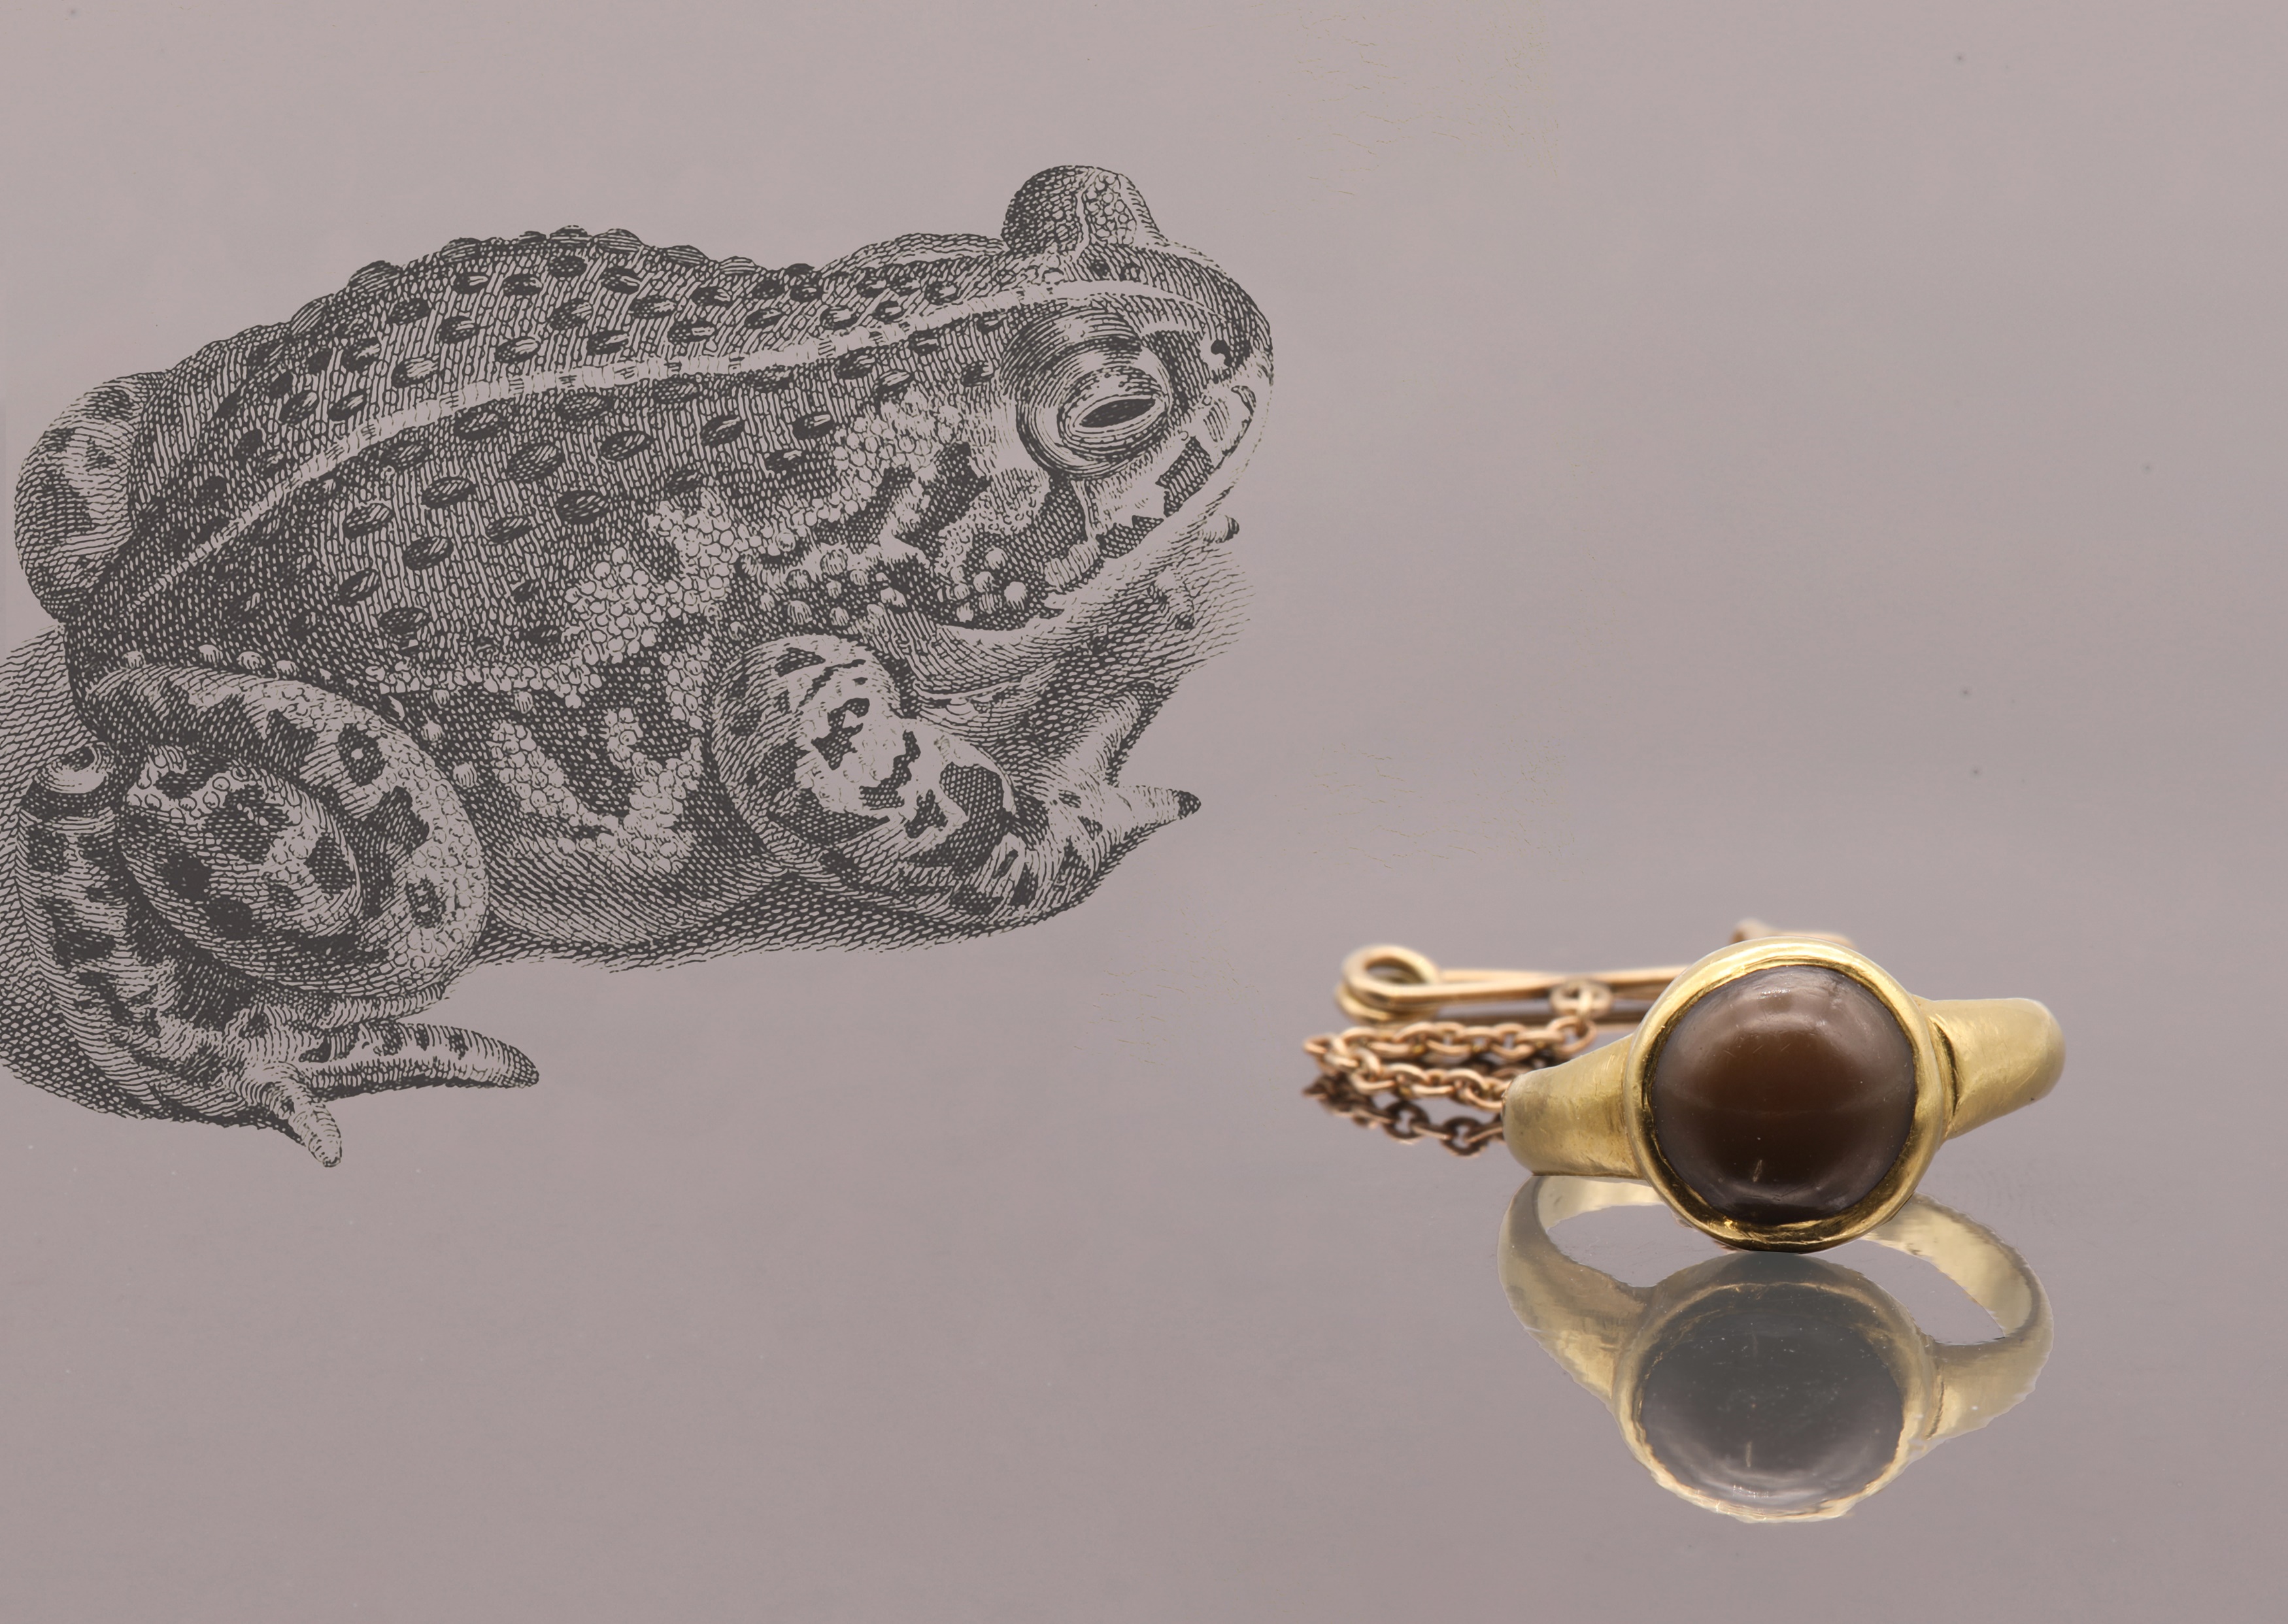 A 16th or 17th century high carat gold 'toadstone' ring